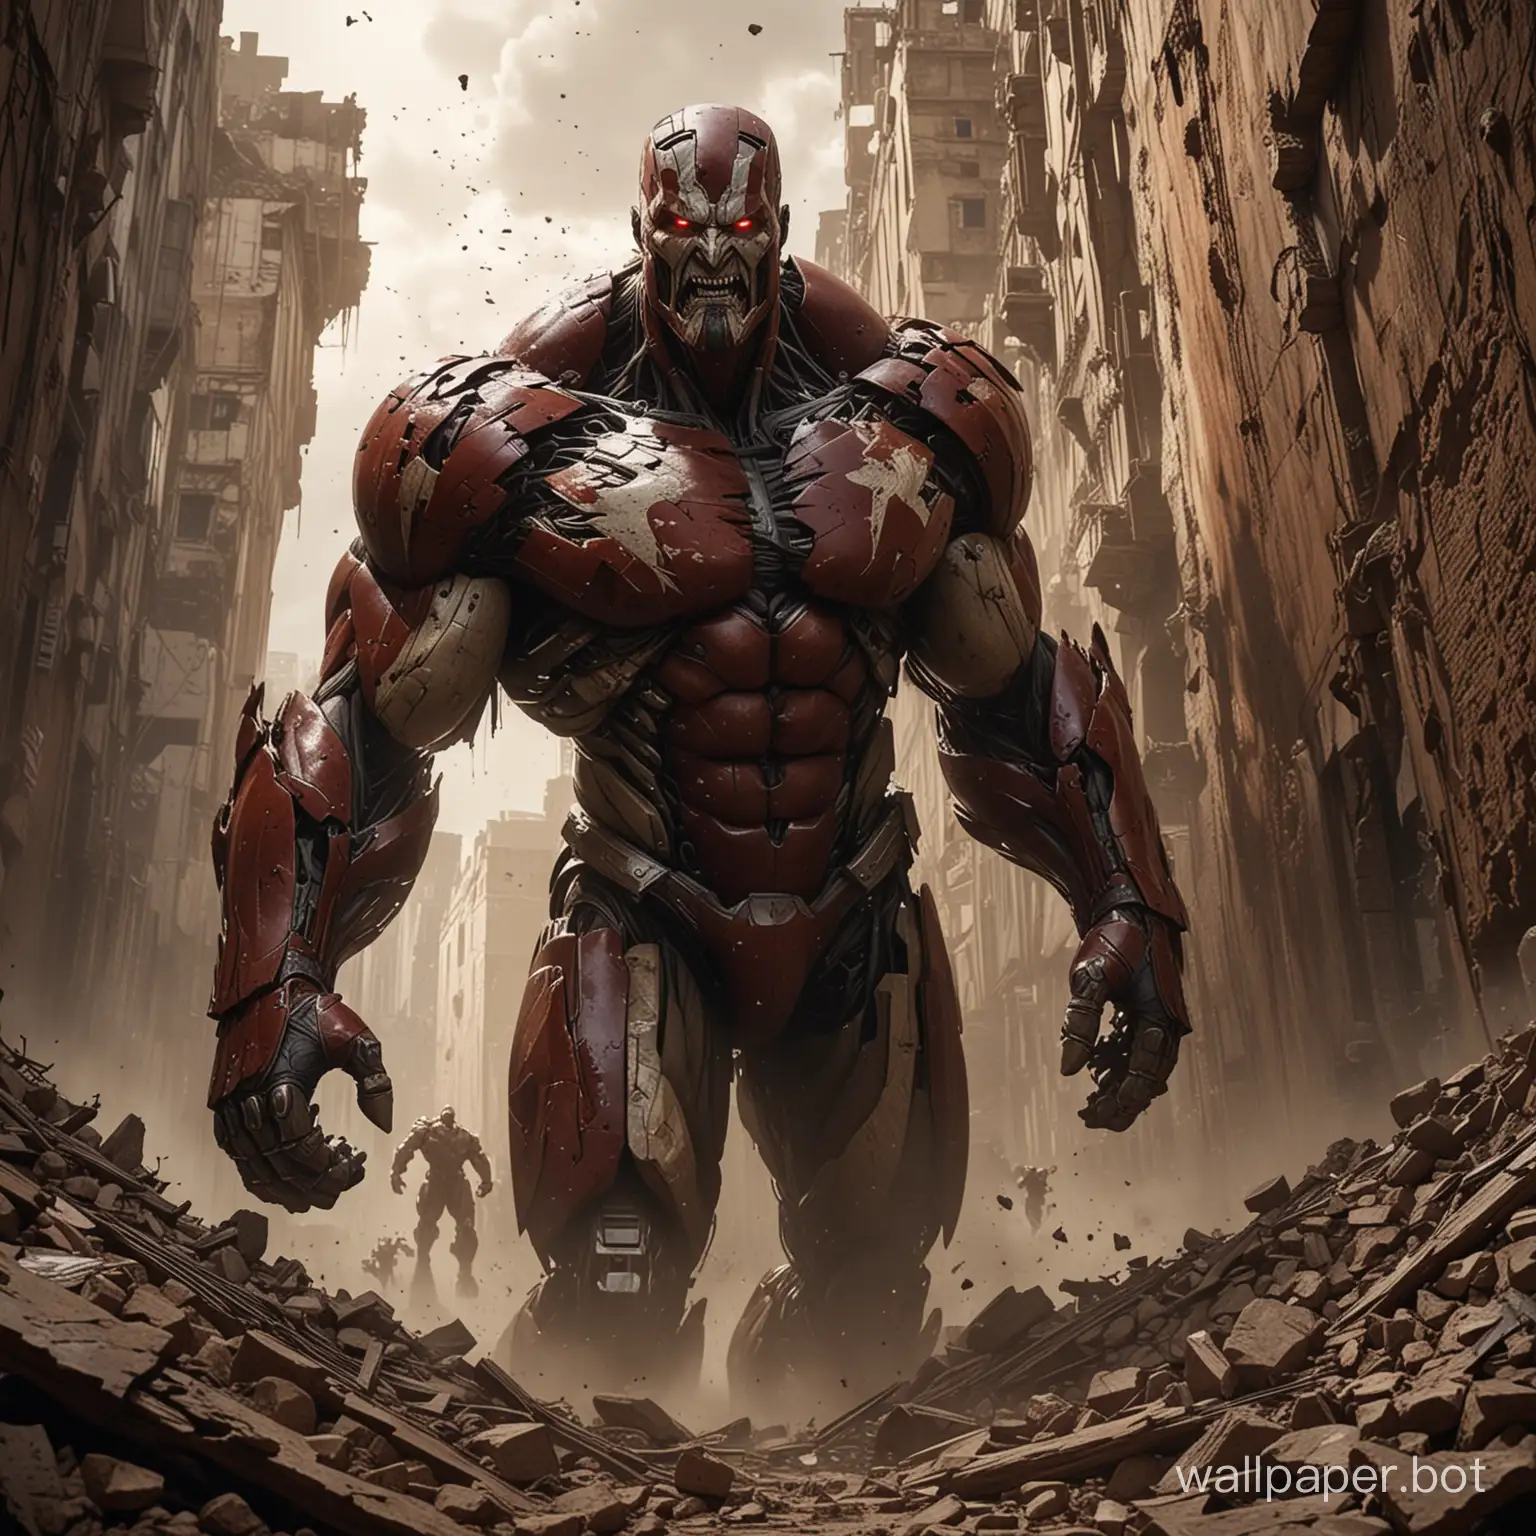 **Prompt:** 8K ultra-high-definition resolution, shot from an upward-looking perspective from inside the city walls outward, displaying the full figure of the impressively colossal titan. The titan is depicted nude, showcasing its action as it crashes through the fortifications, with fine details of the ruined walls and flying debris. The titan's menacing expression and sharp teeth are captured, (with high dynamic range, high contrast, detailed light and shadow treatment: 1.3 times), and the powerful movements of the red-skinned titan's muscles are vividly lethal (ultra-realistic and high-resolution: 1.5 times). The combat stance is distinctly intimidating and offensive. The scene portrays a massive breach, with the titan's shoulders lunged forward, radiating a powerful sense of movement and urgency. Close-ups are taken of the haphazard flight paths of the debris and the gigantic figure's powerful stance, making the presence of the titan in the picture deeply impactful and immersing, embodying raw and primitive force and ferocity.